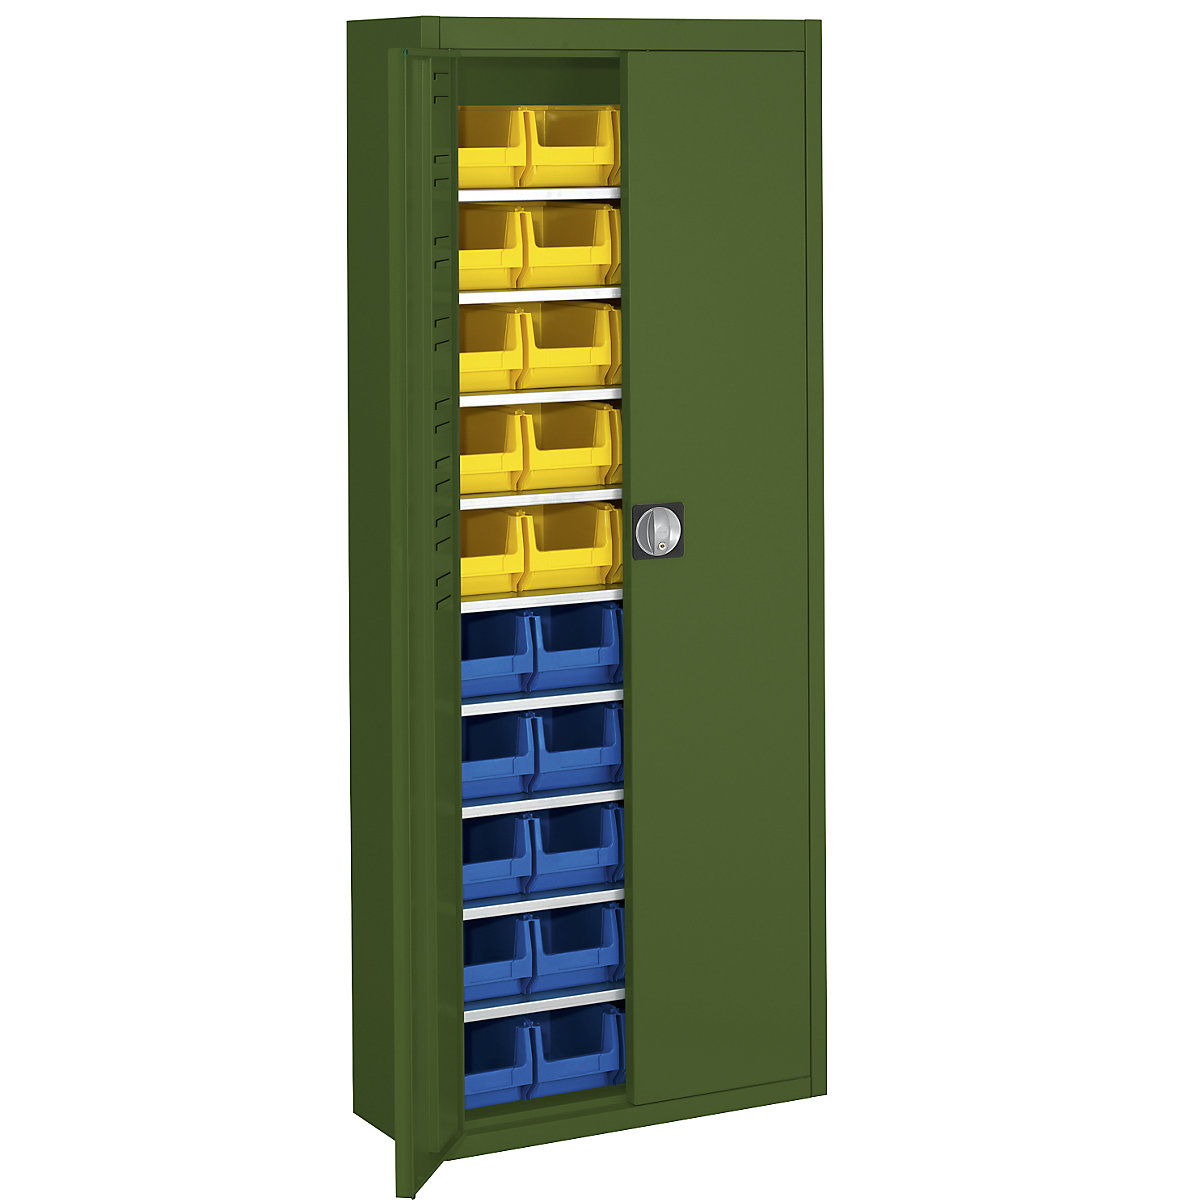 Storage cupboard with open fronted storage bins – mauser, HxWxD 1740 x 680 x 280 mm, single colour, green, 40 bins-6